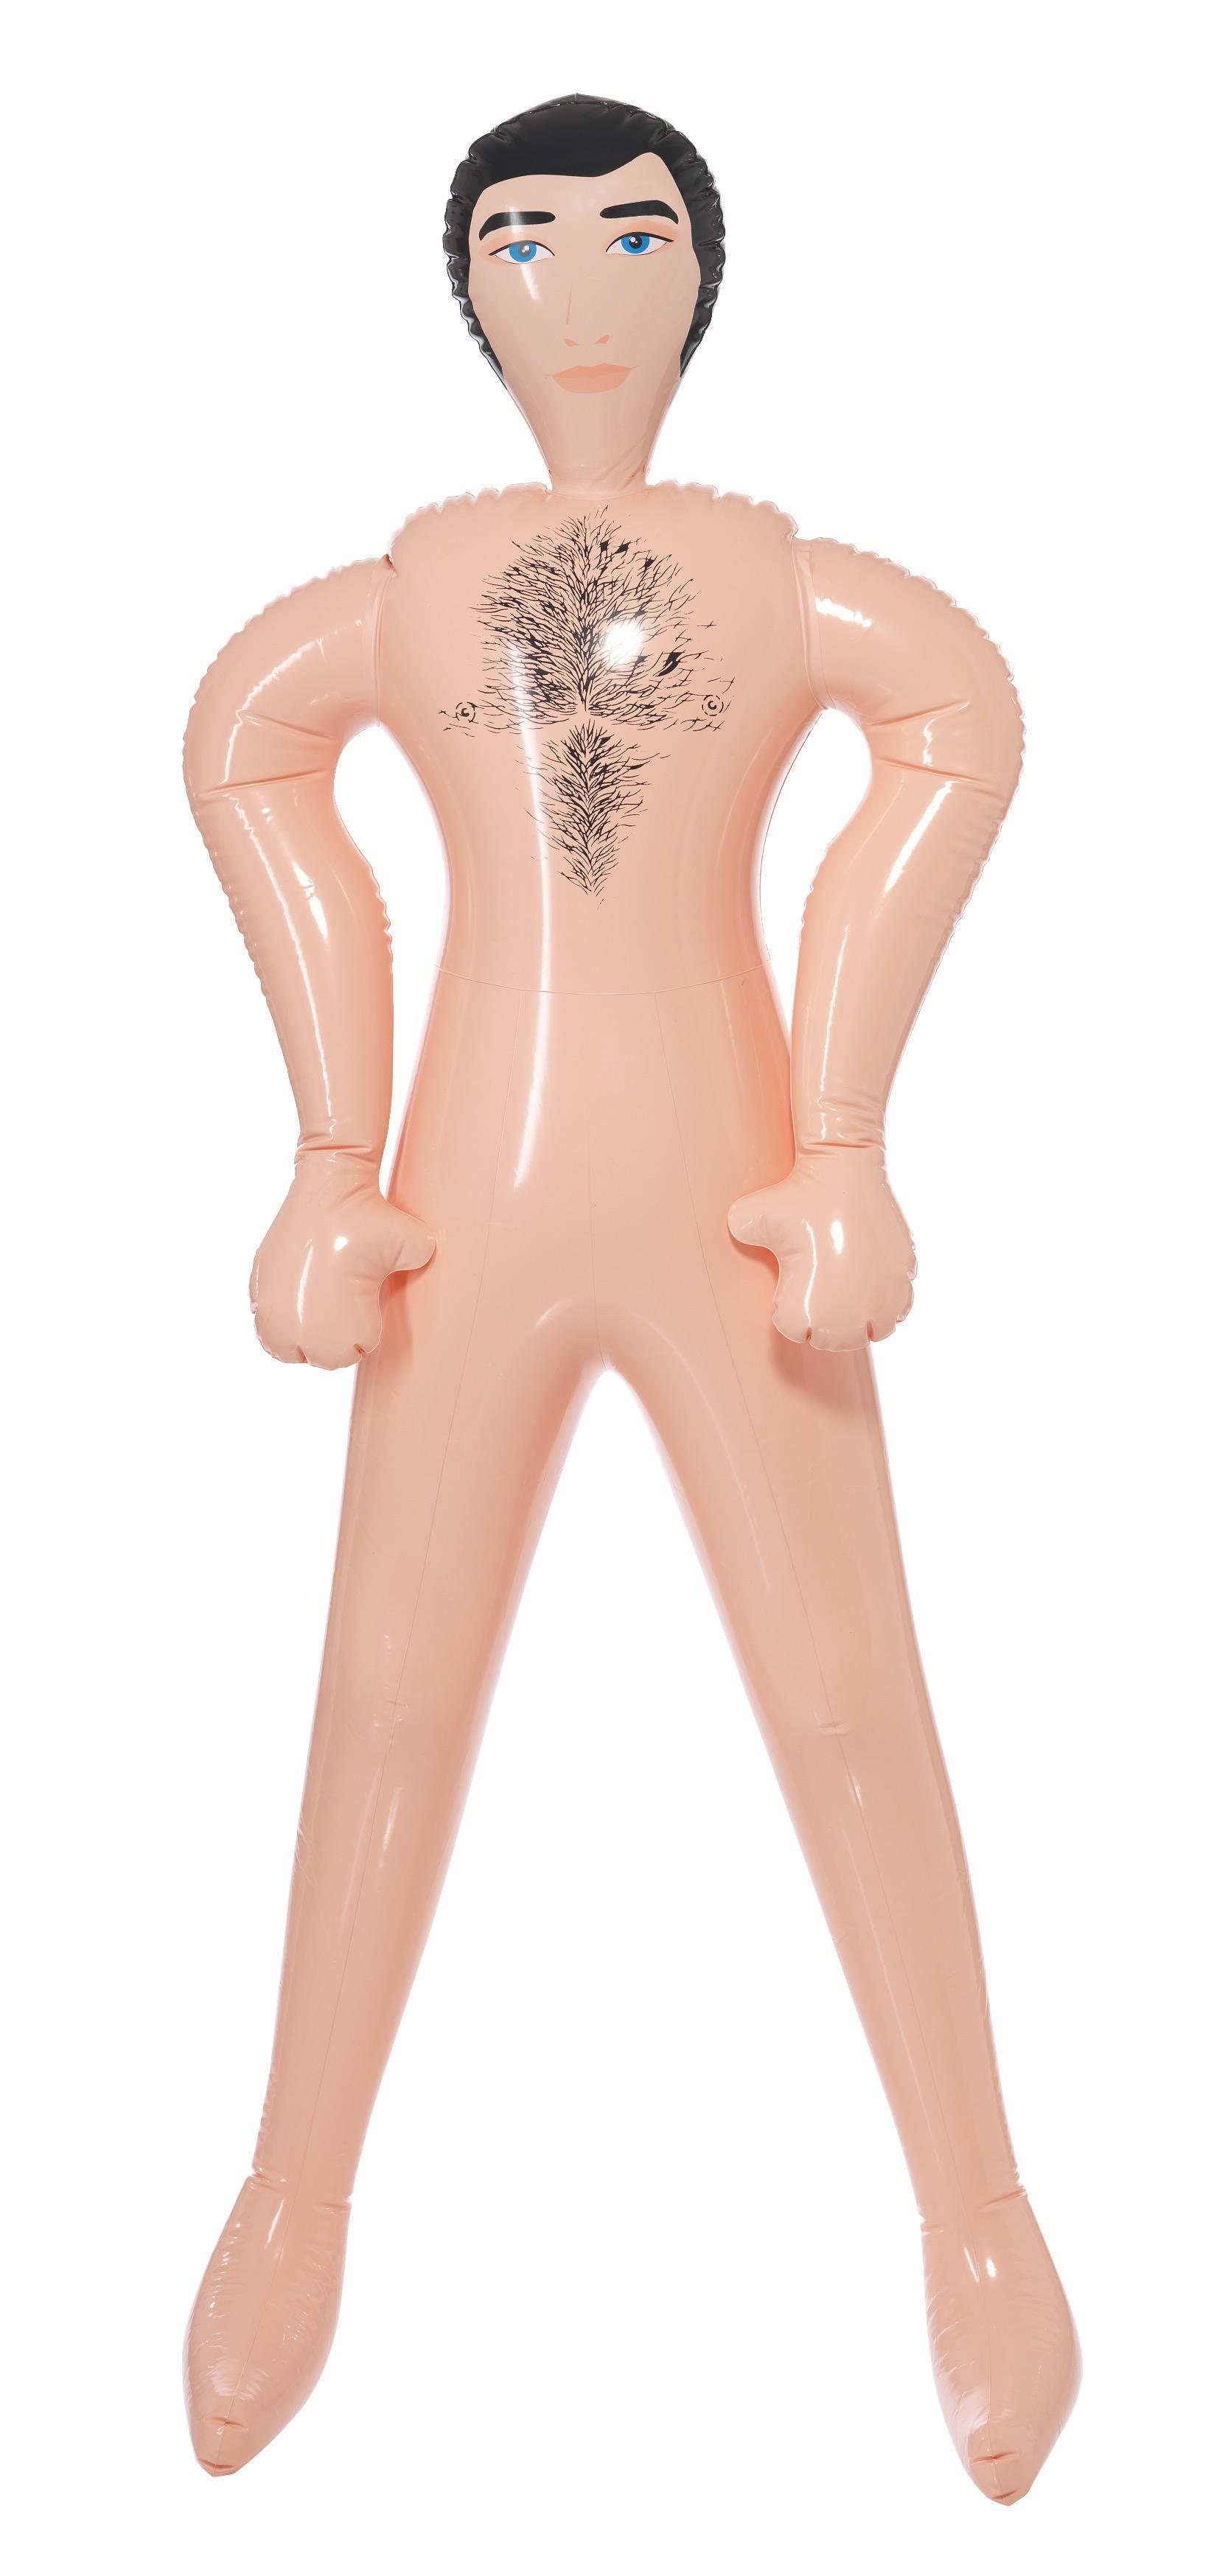 Blow Up Doll Male